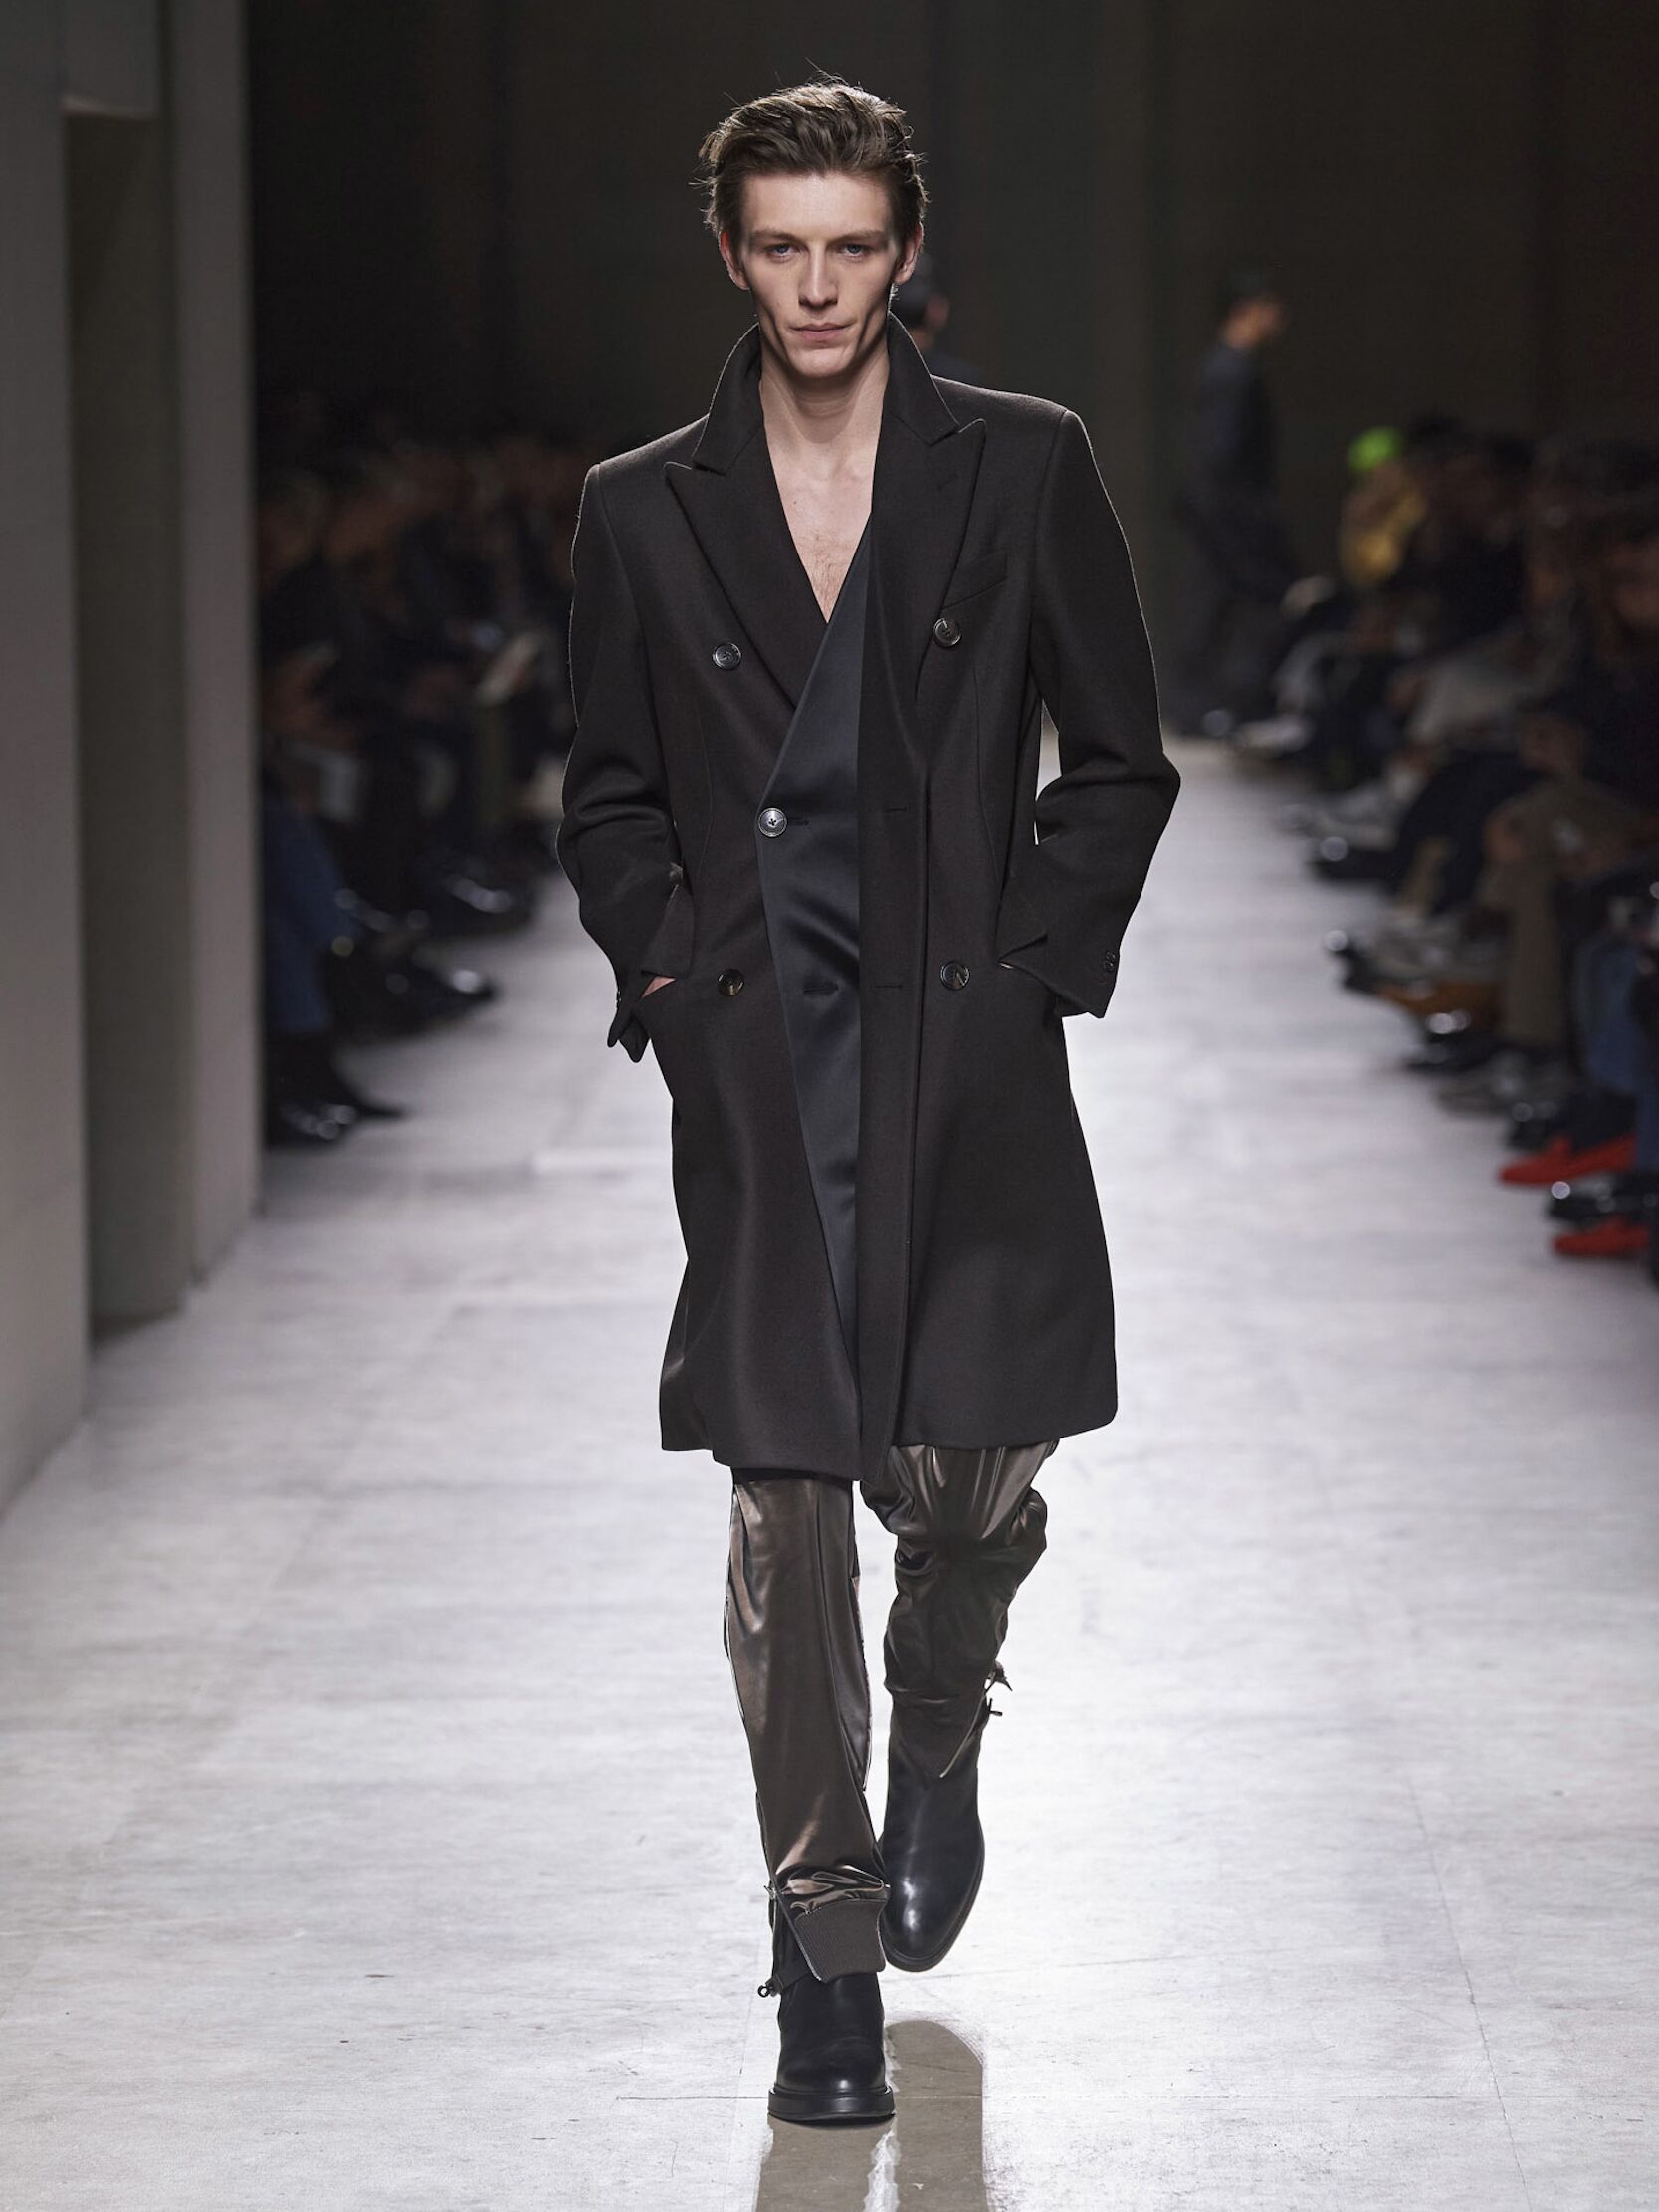 HERMÈS FALL WINTER 2020 MEN’S COLLECTION | The Skinny Beep